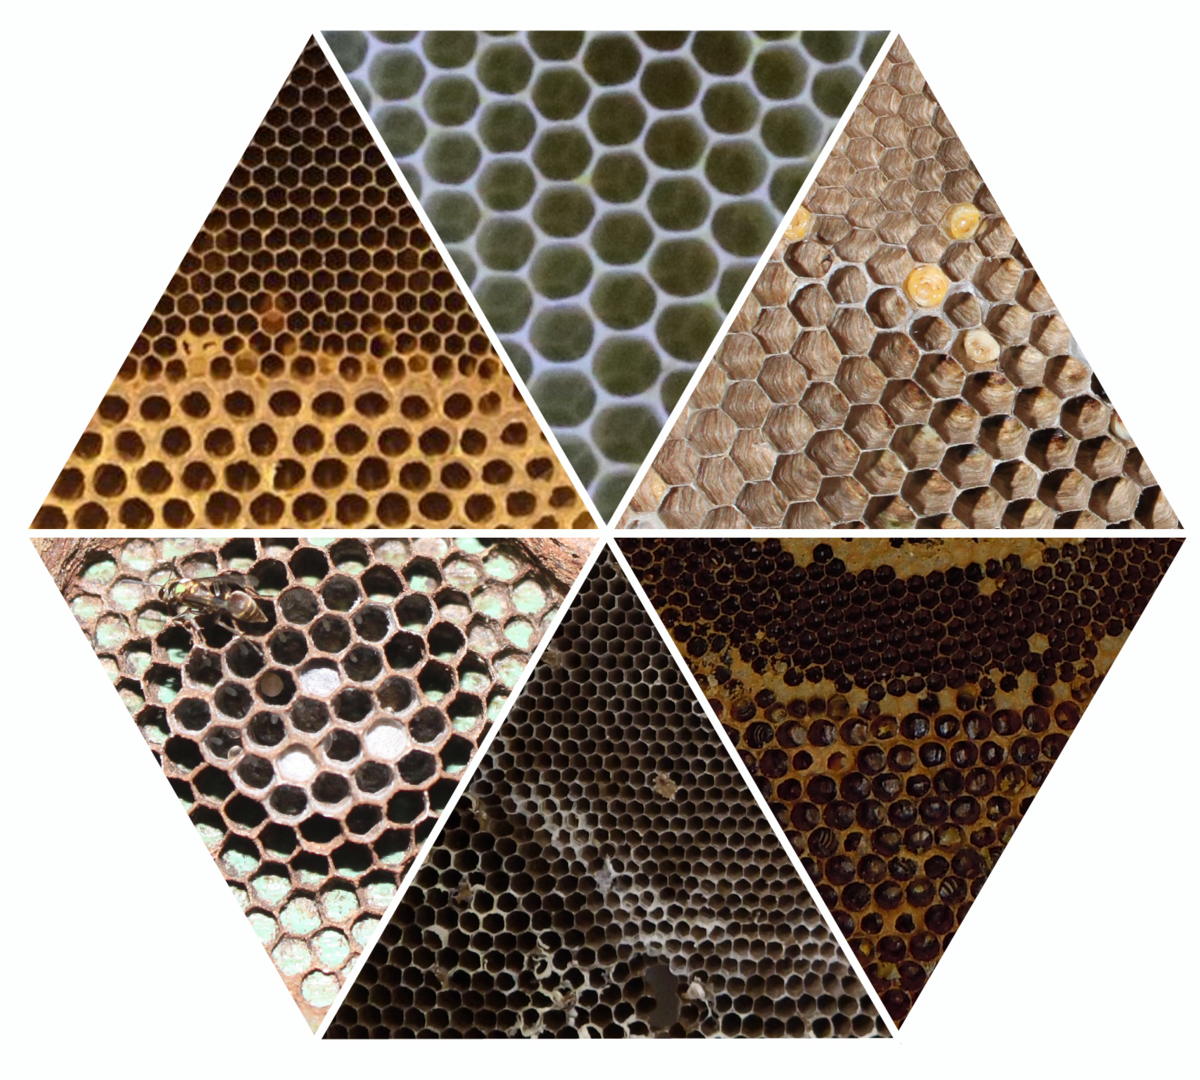 A diagram of six different honeycomb patterns. These illustrate the structural differences and similarities between the honeycombs of honeybees and wasps.